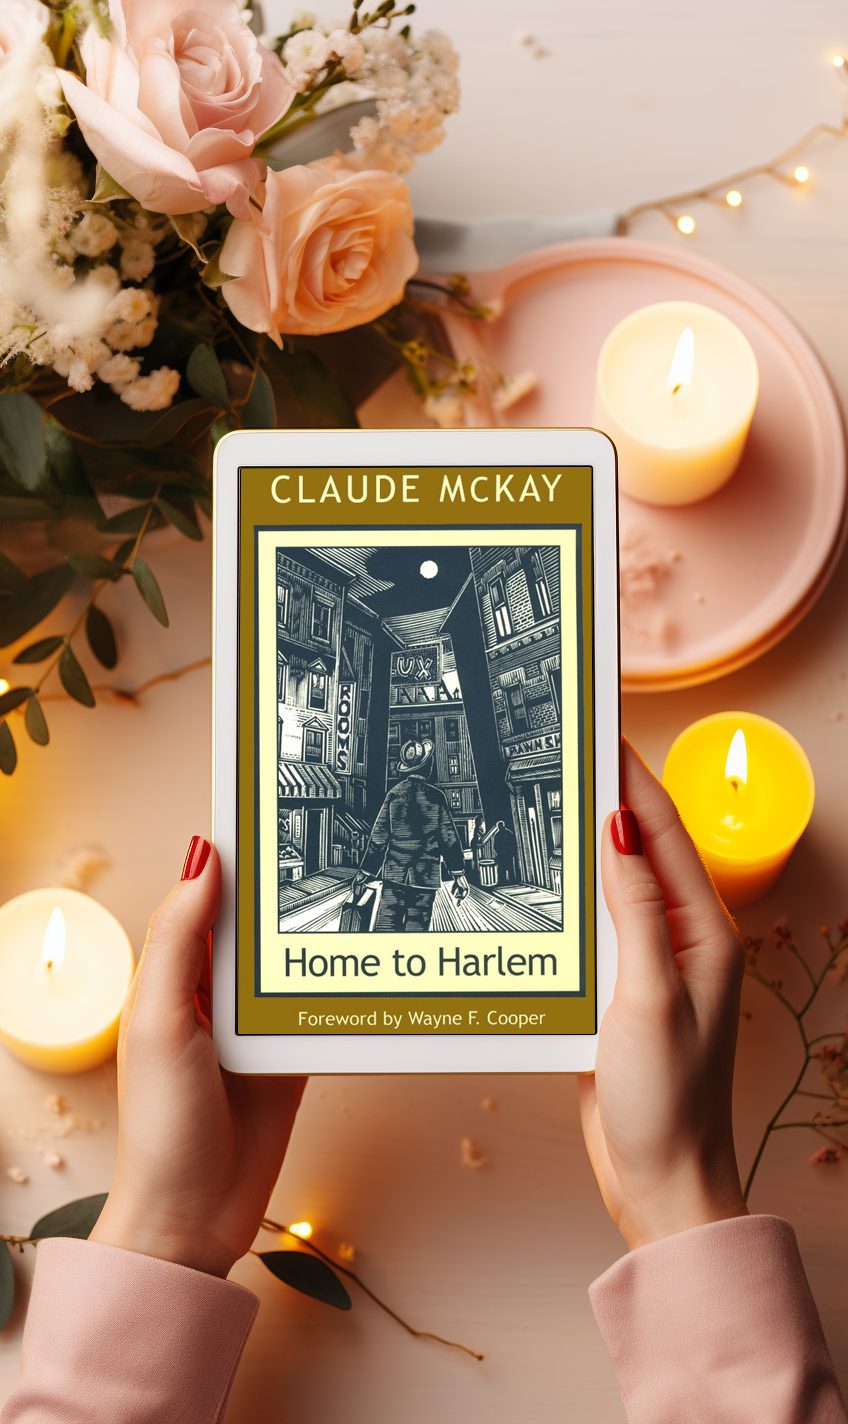 home to harlem by claude mckay